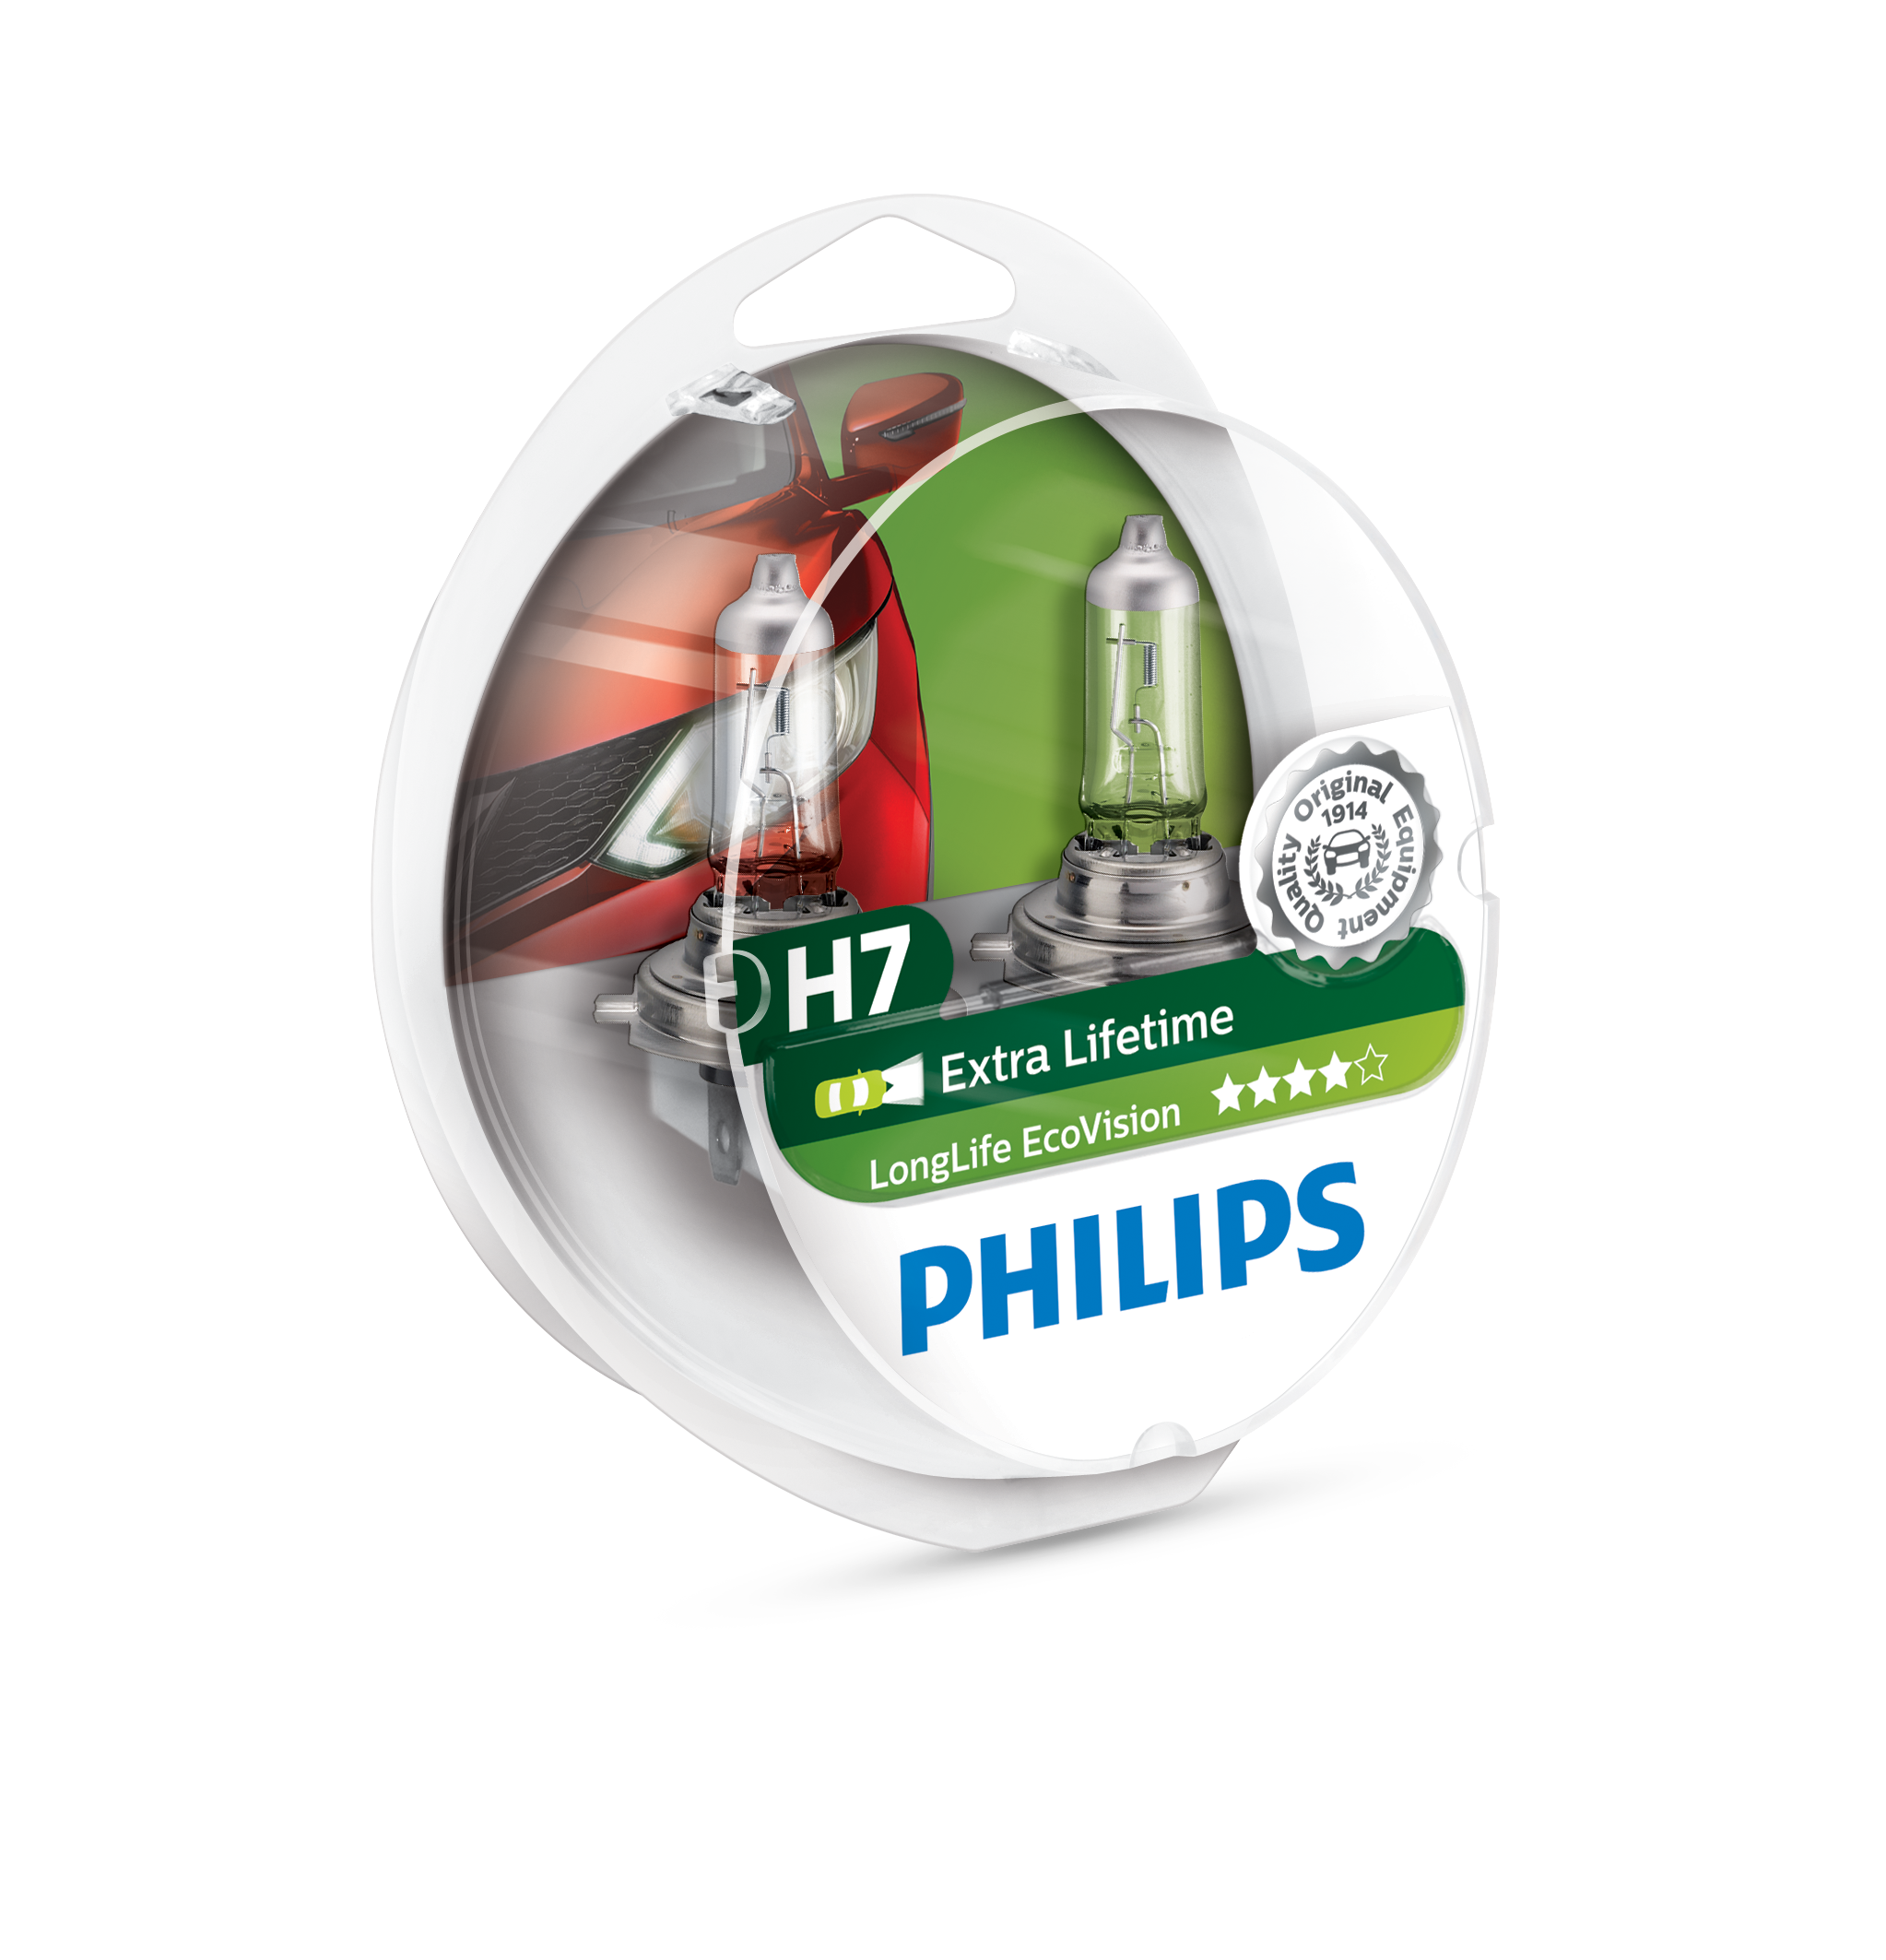 H7 EcoVision - 2 stk., Philips 12972LLECOS2